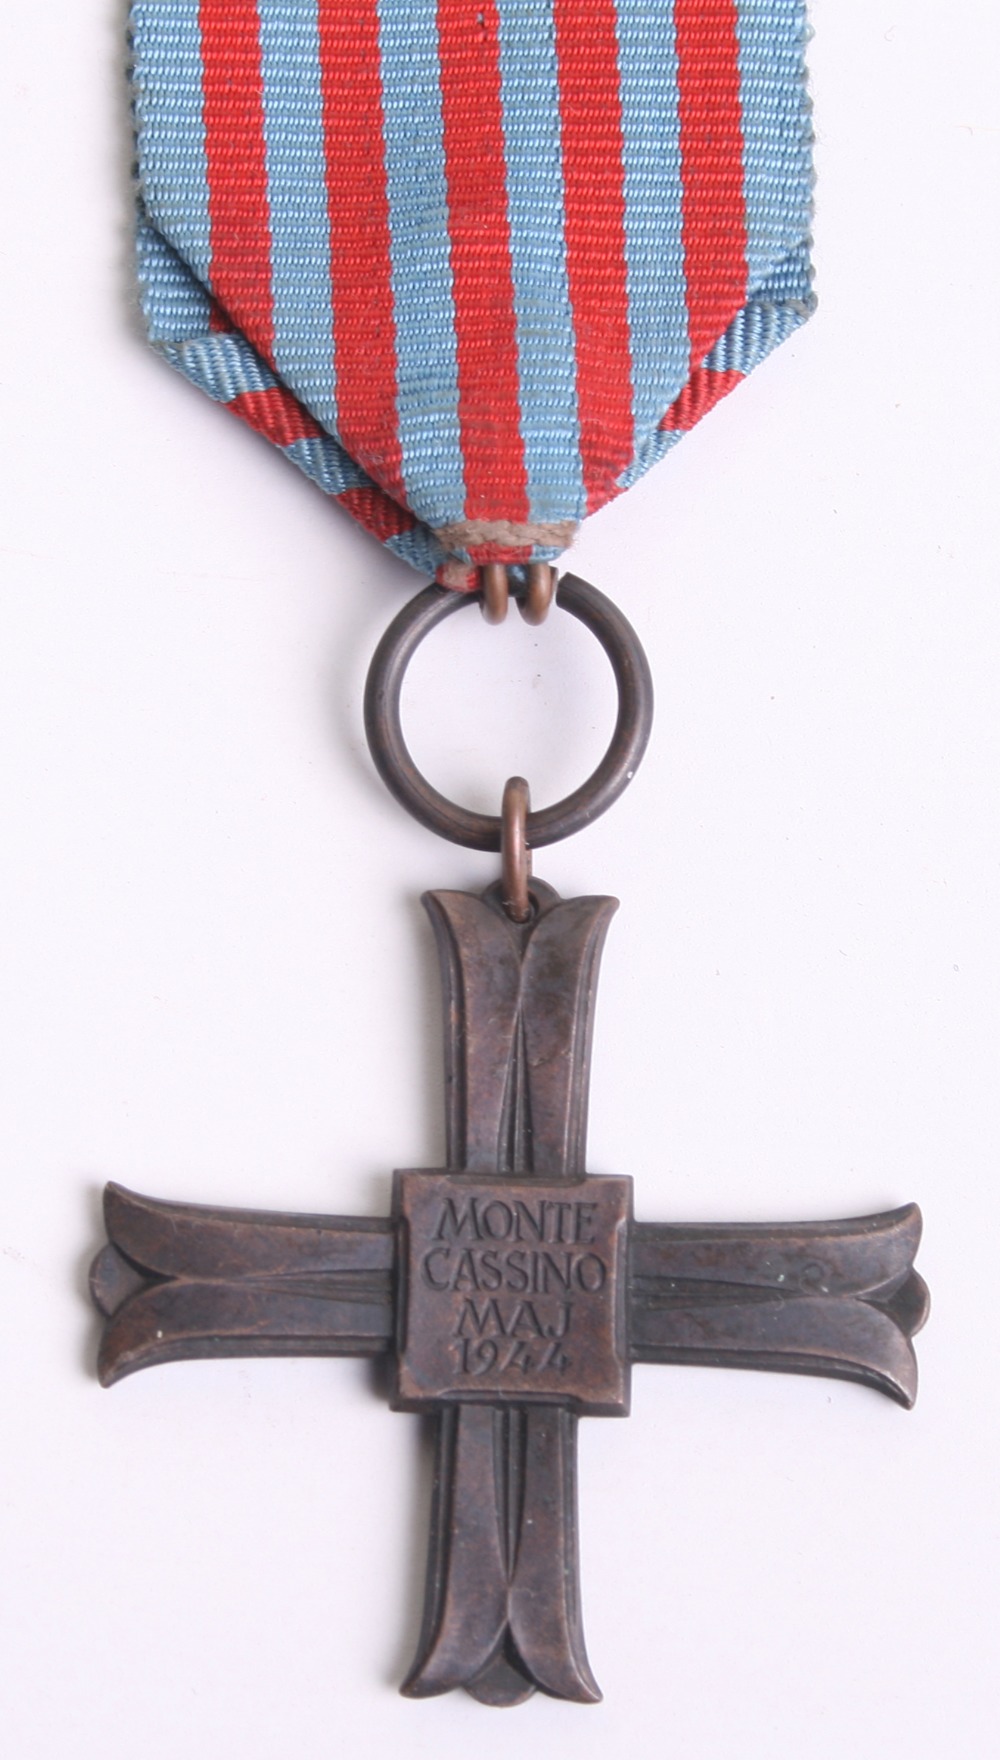 Polish Monte Cassino Cross HQ 2nd Corps, the cross is numbered on the reverse 250. Complete with the